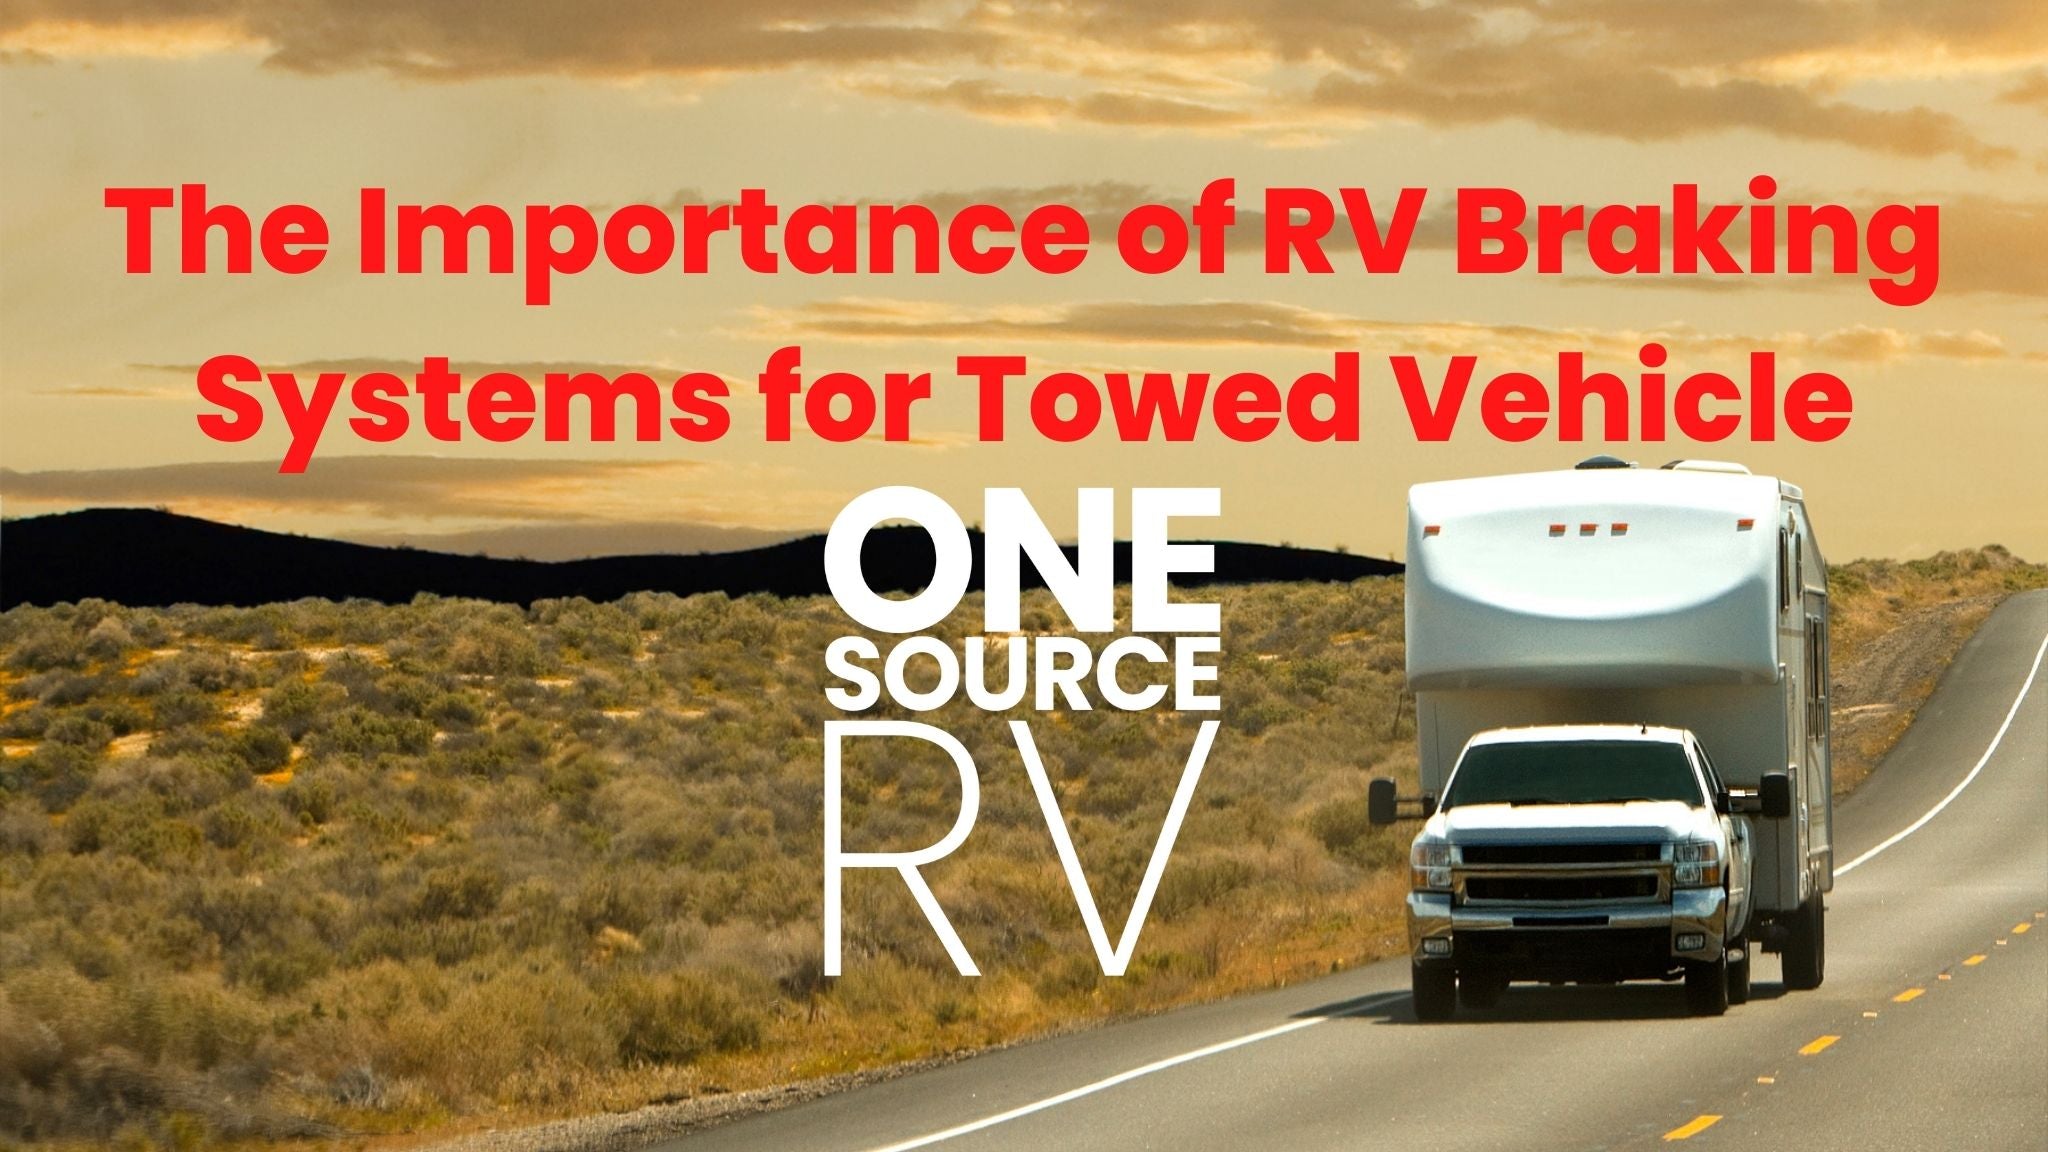 The importance of RV Braking Systems for Towed Vehicles